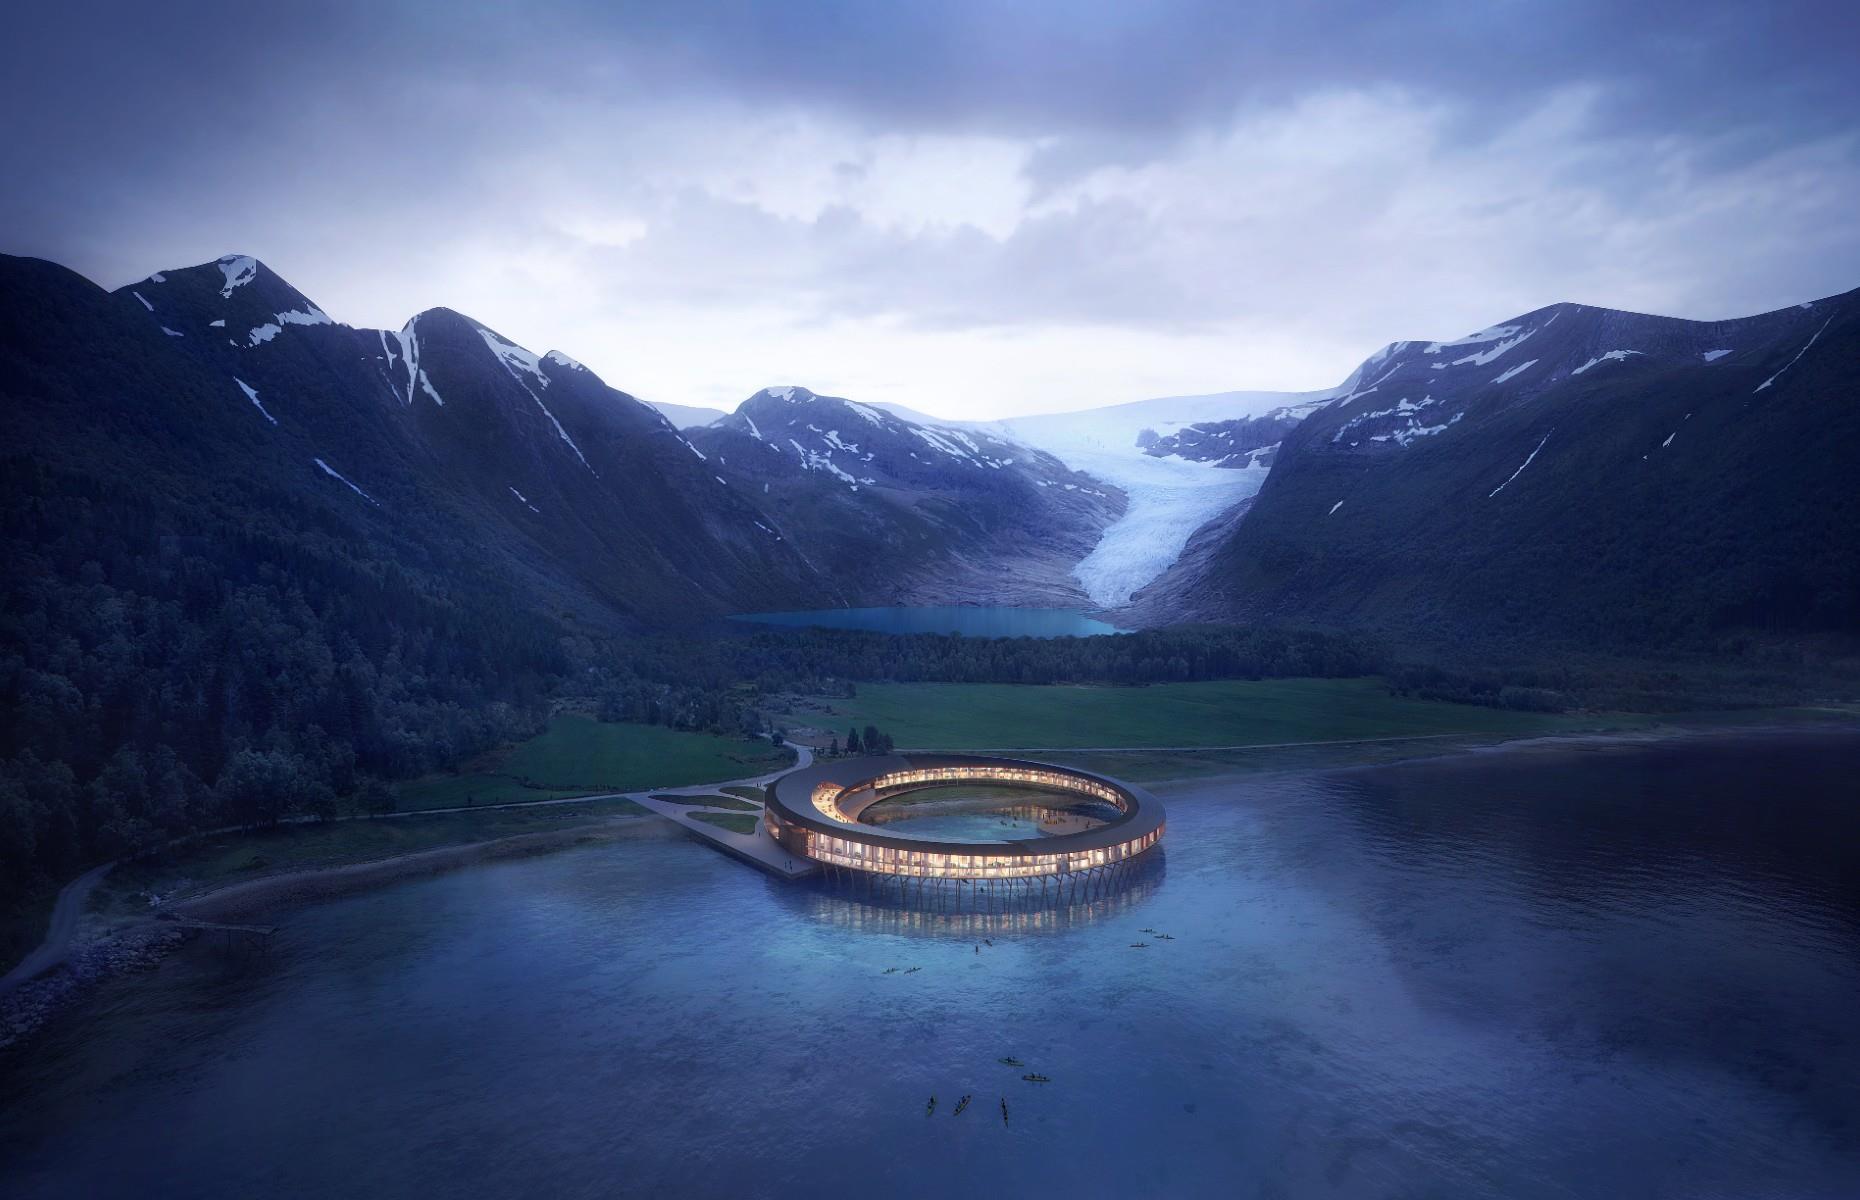 The hotel's design is inspired by a 'fiskehjell', a wooden structure used to dry out fish, as well as traditional fishermen's homes. And it looks especially striking against its mountain backdrop. Beyond ogling the hotel and surrounding landscapes, guests can relax at the two-storey spa or get involved with activities, from sailing on the fjords in summer to cross-country skiing in winter.